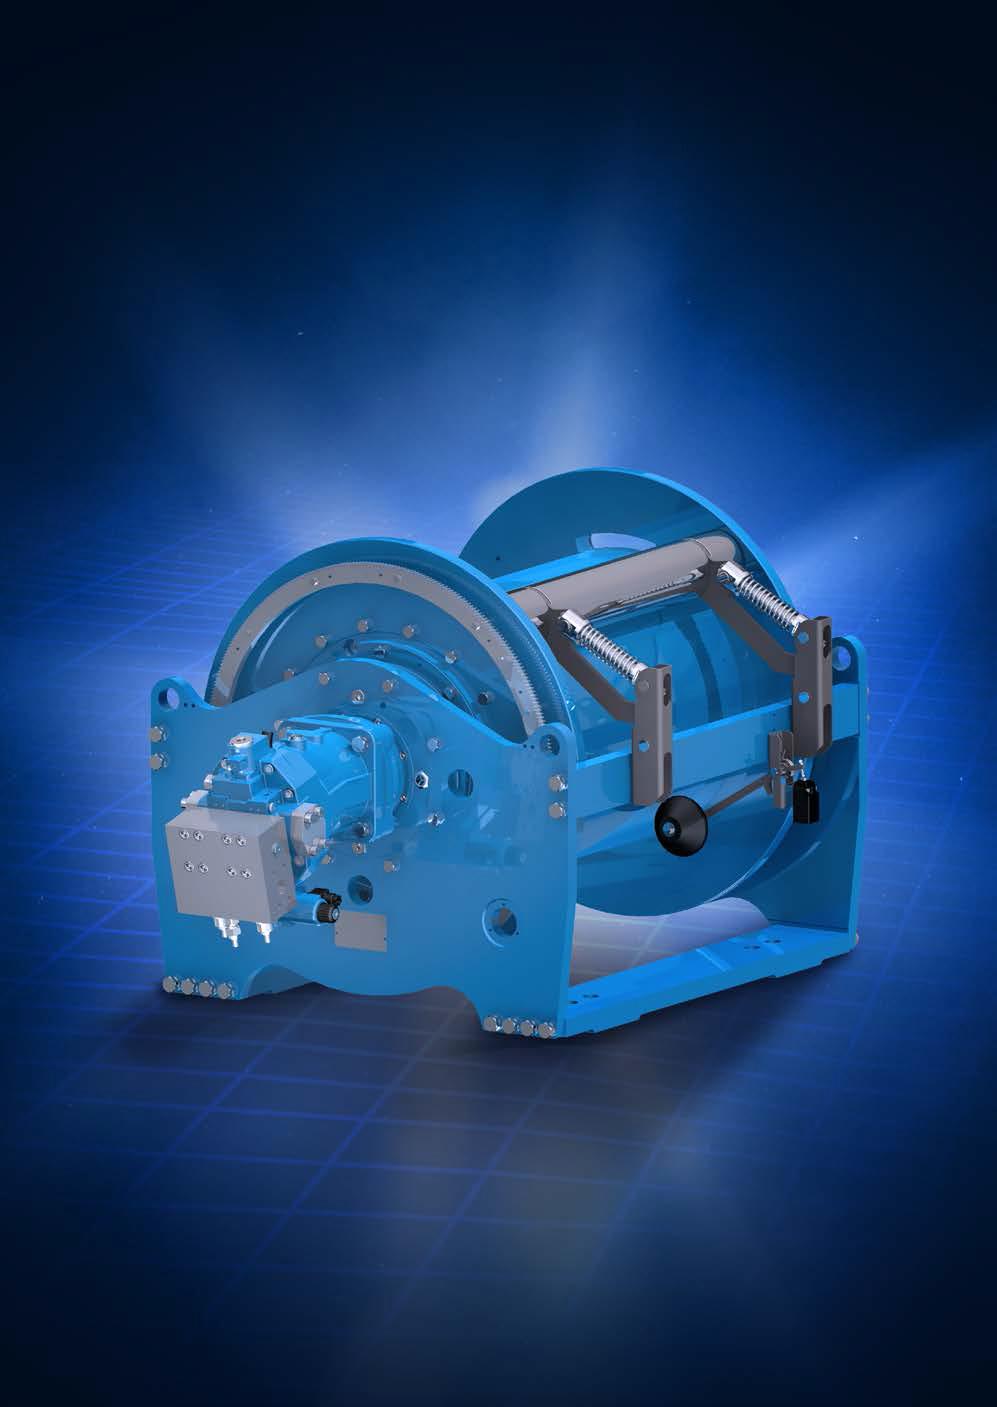 Brevini Evolution Series Winches: A brand new product architecture Dana has developed a new series of high-performance Brevini winches for construction, industrial, and material-handling vehicles, as